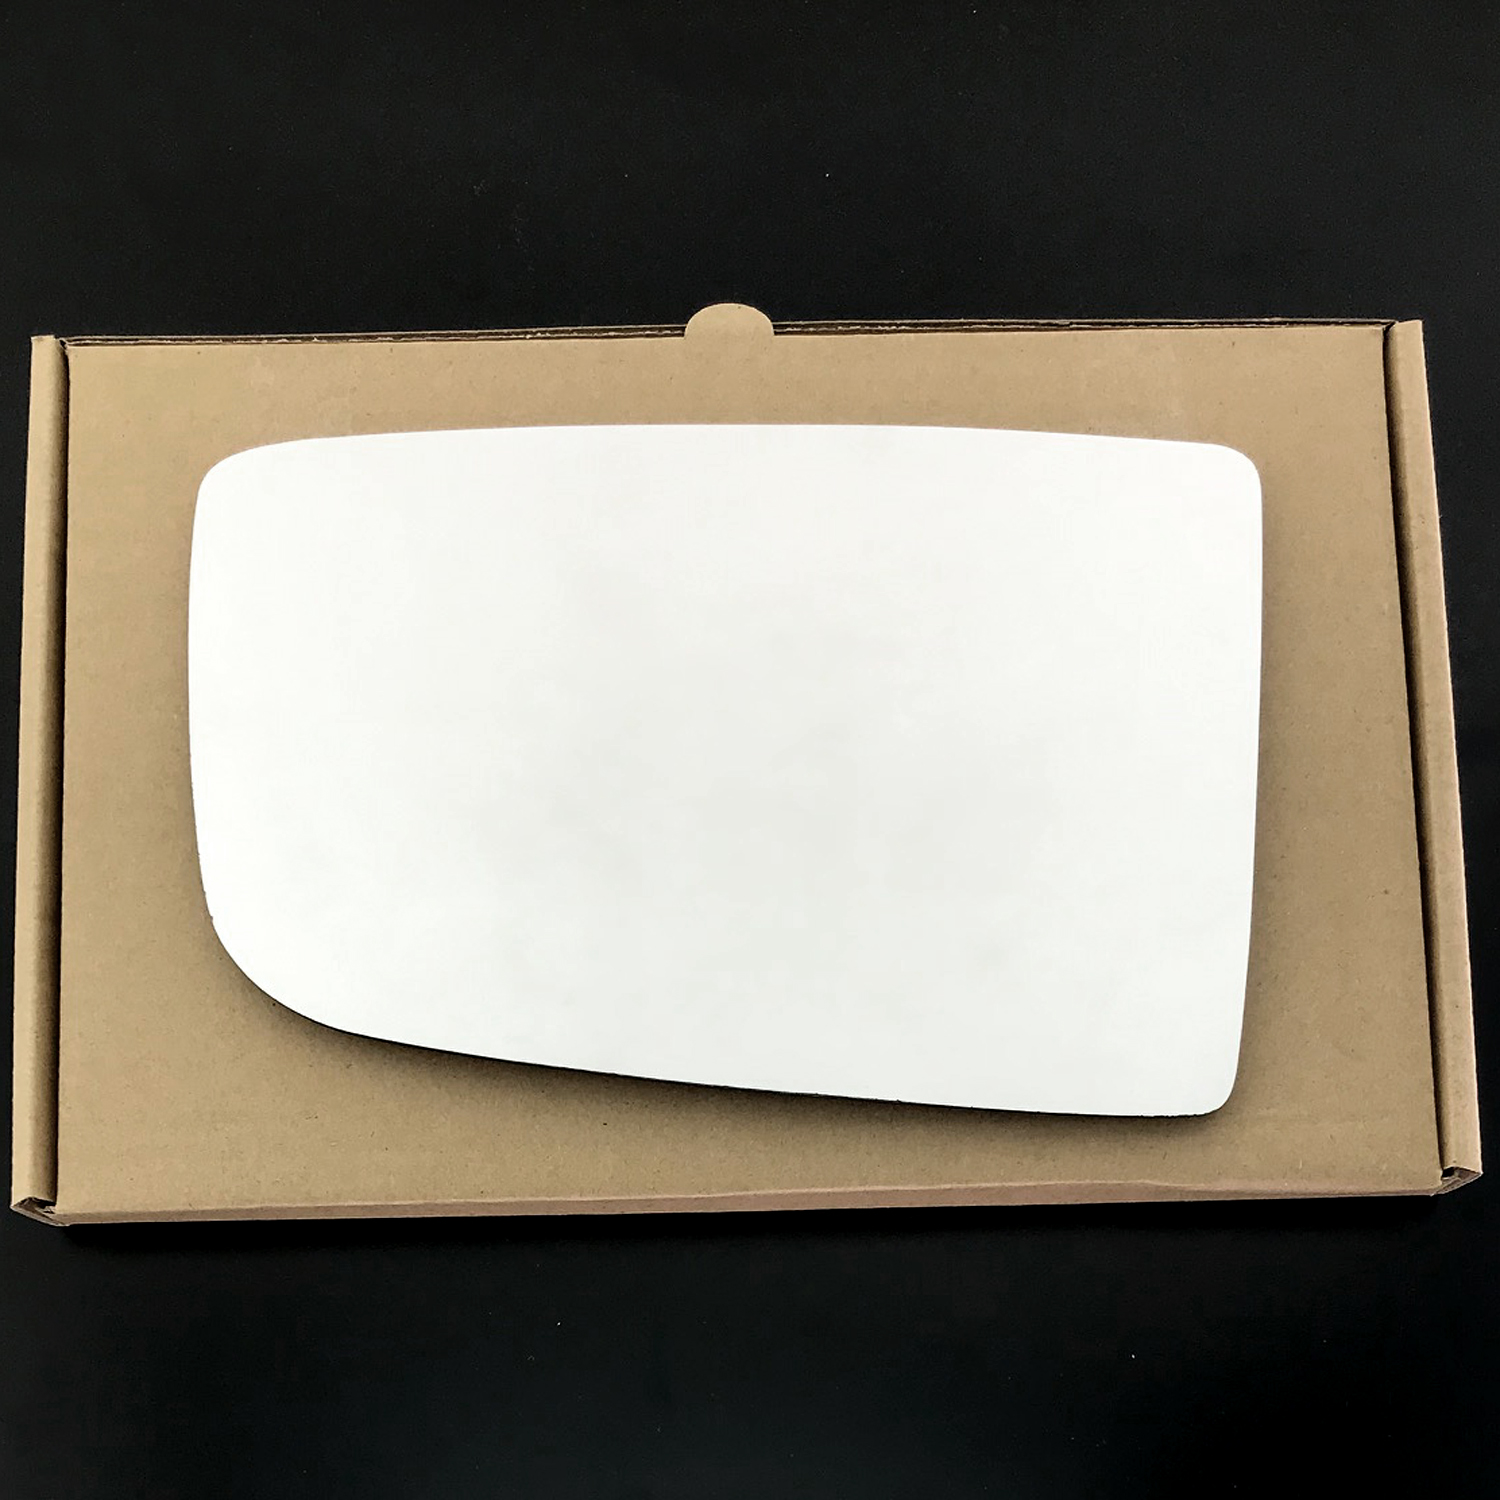 Mercedes Sprinter CHASSIS CAB Wing Mirror Glass LEFT HAND ( UK Passenger Side ) 2006 to 2011 – Convex Wing Mirror